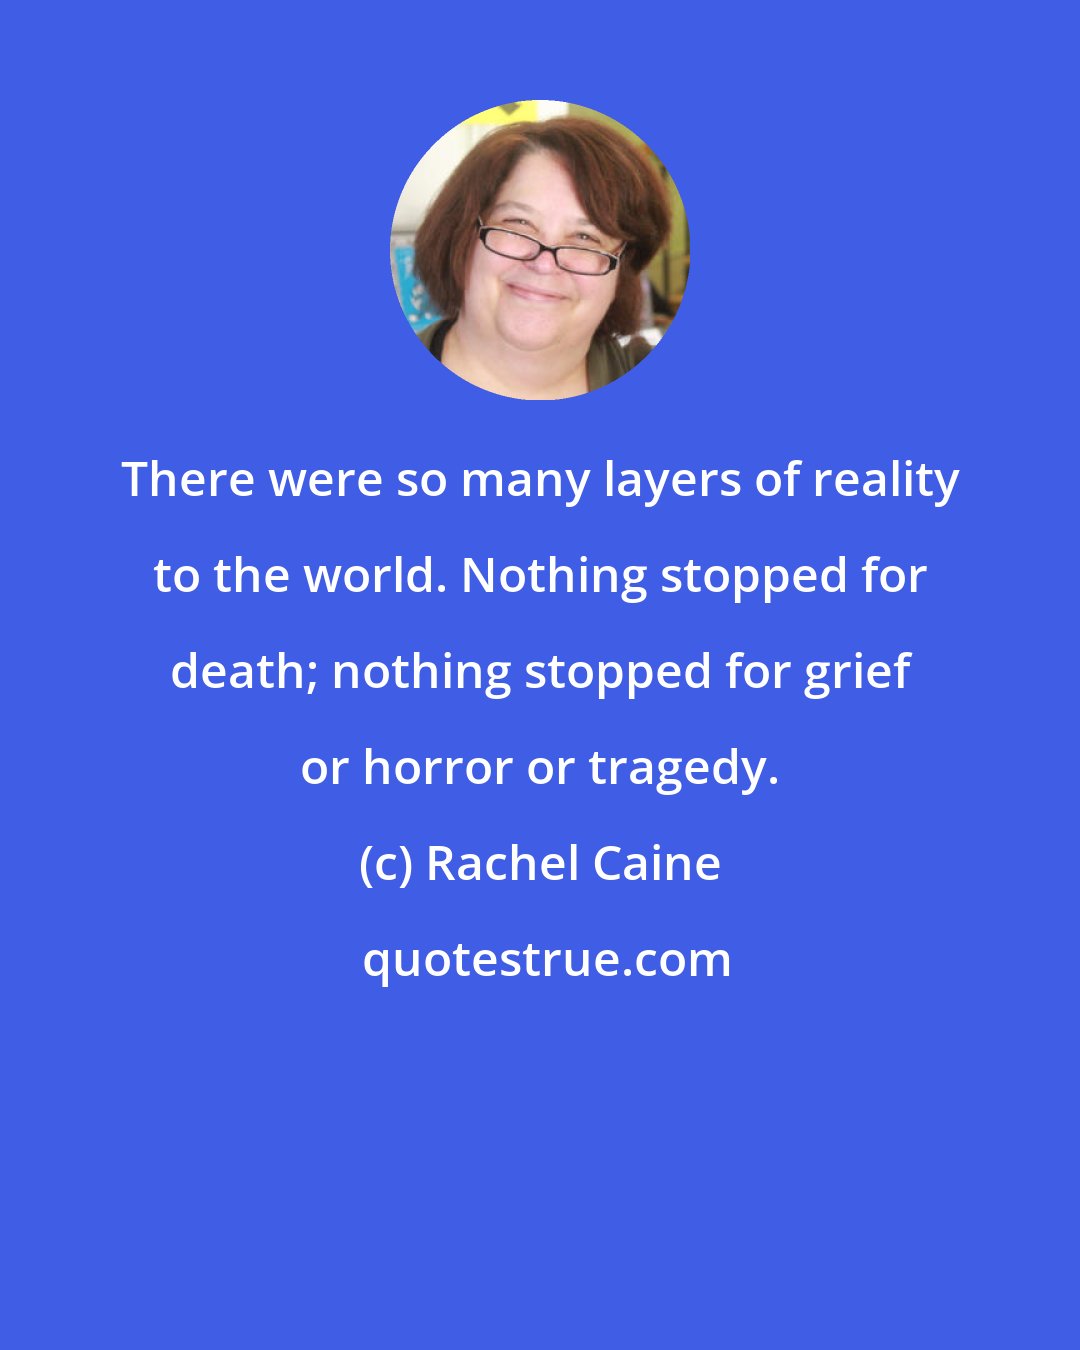 Rachel Caine: There were so many layers of reality to the world. Nothing stopped for death; nothing stopped for grief or horror or tragedy.